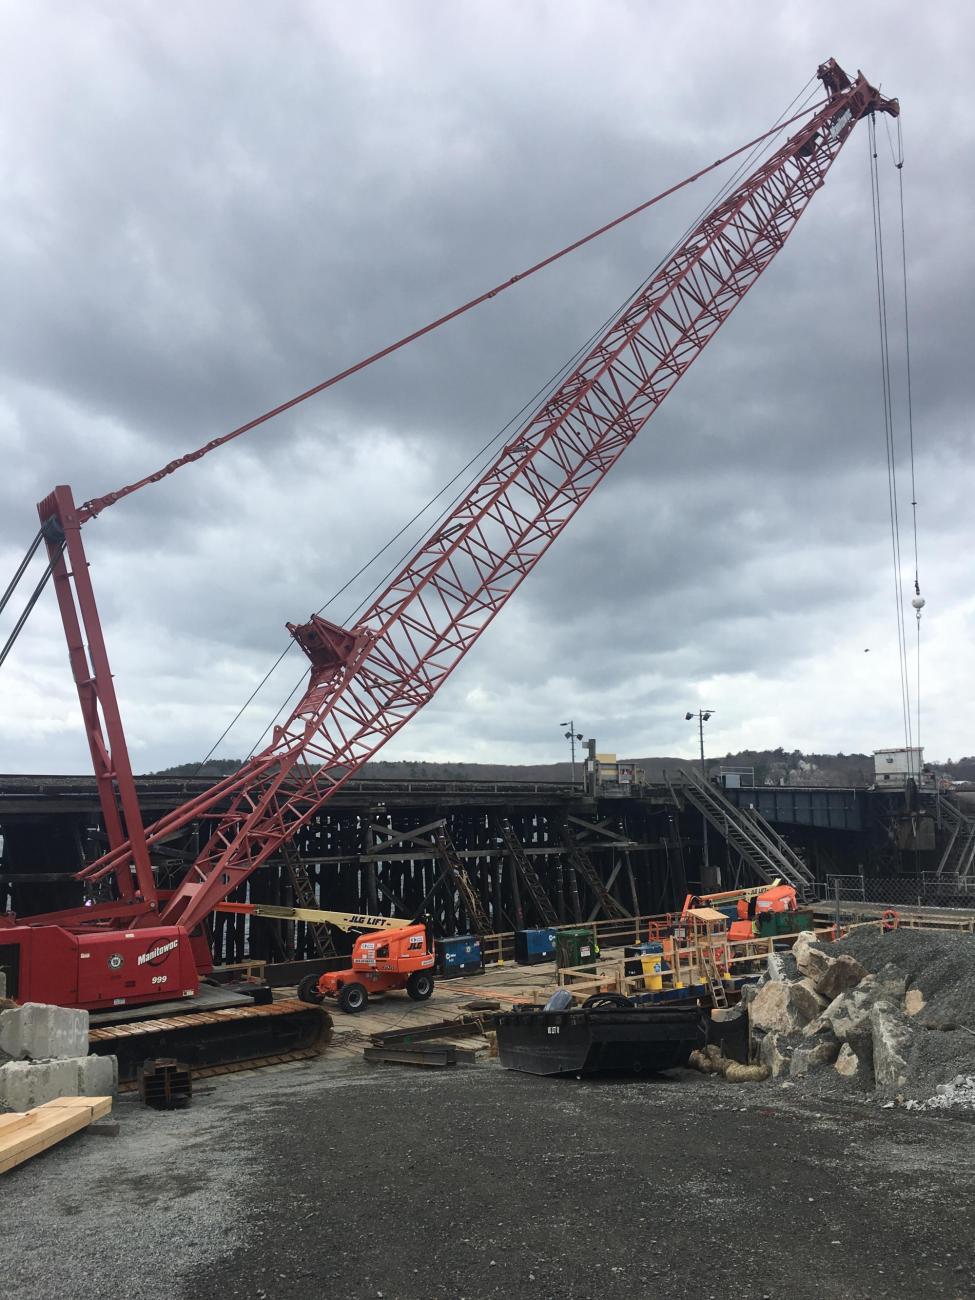 Ground level view of a large red crane at the Gloucester Drawbridge construction site.